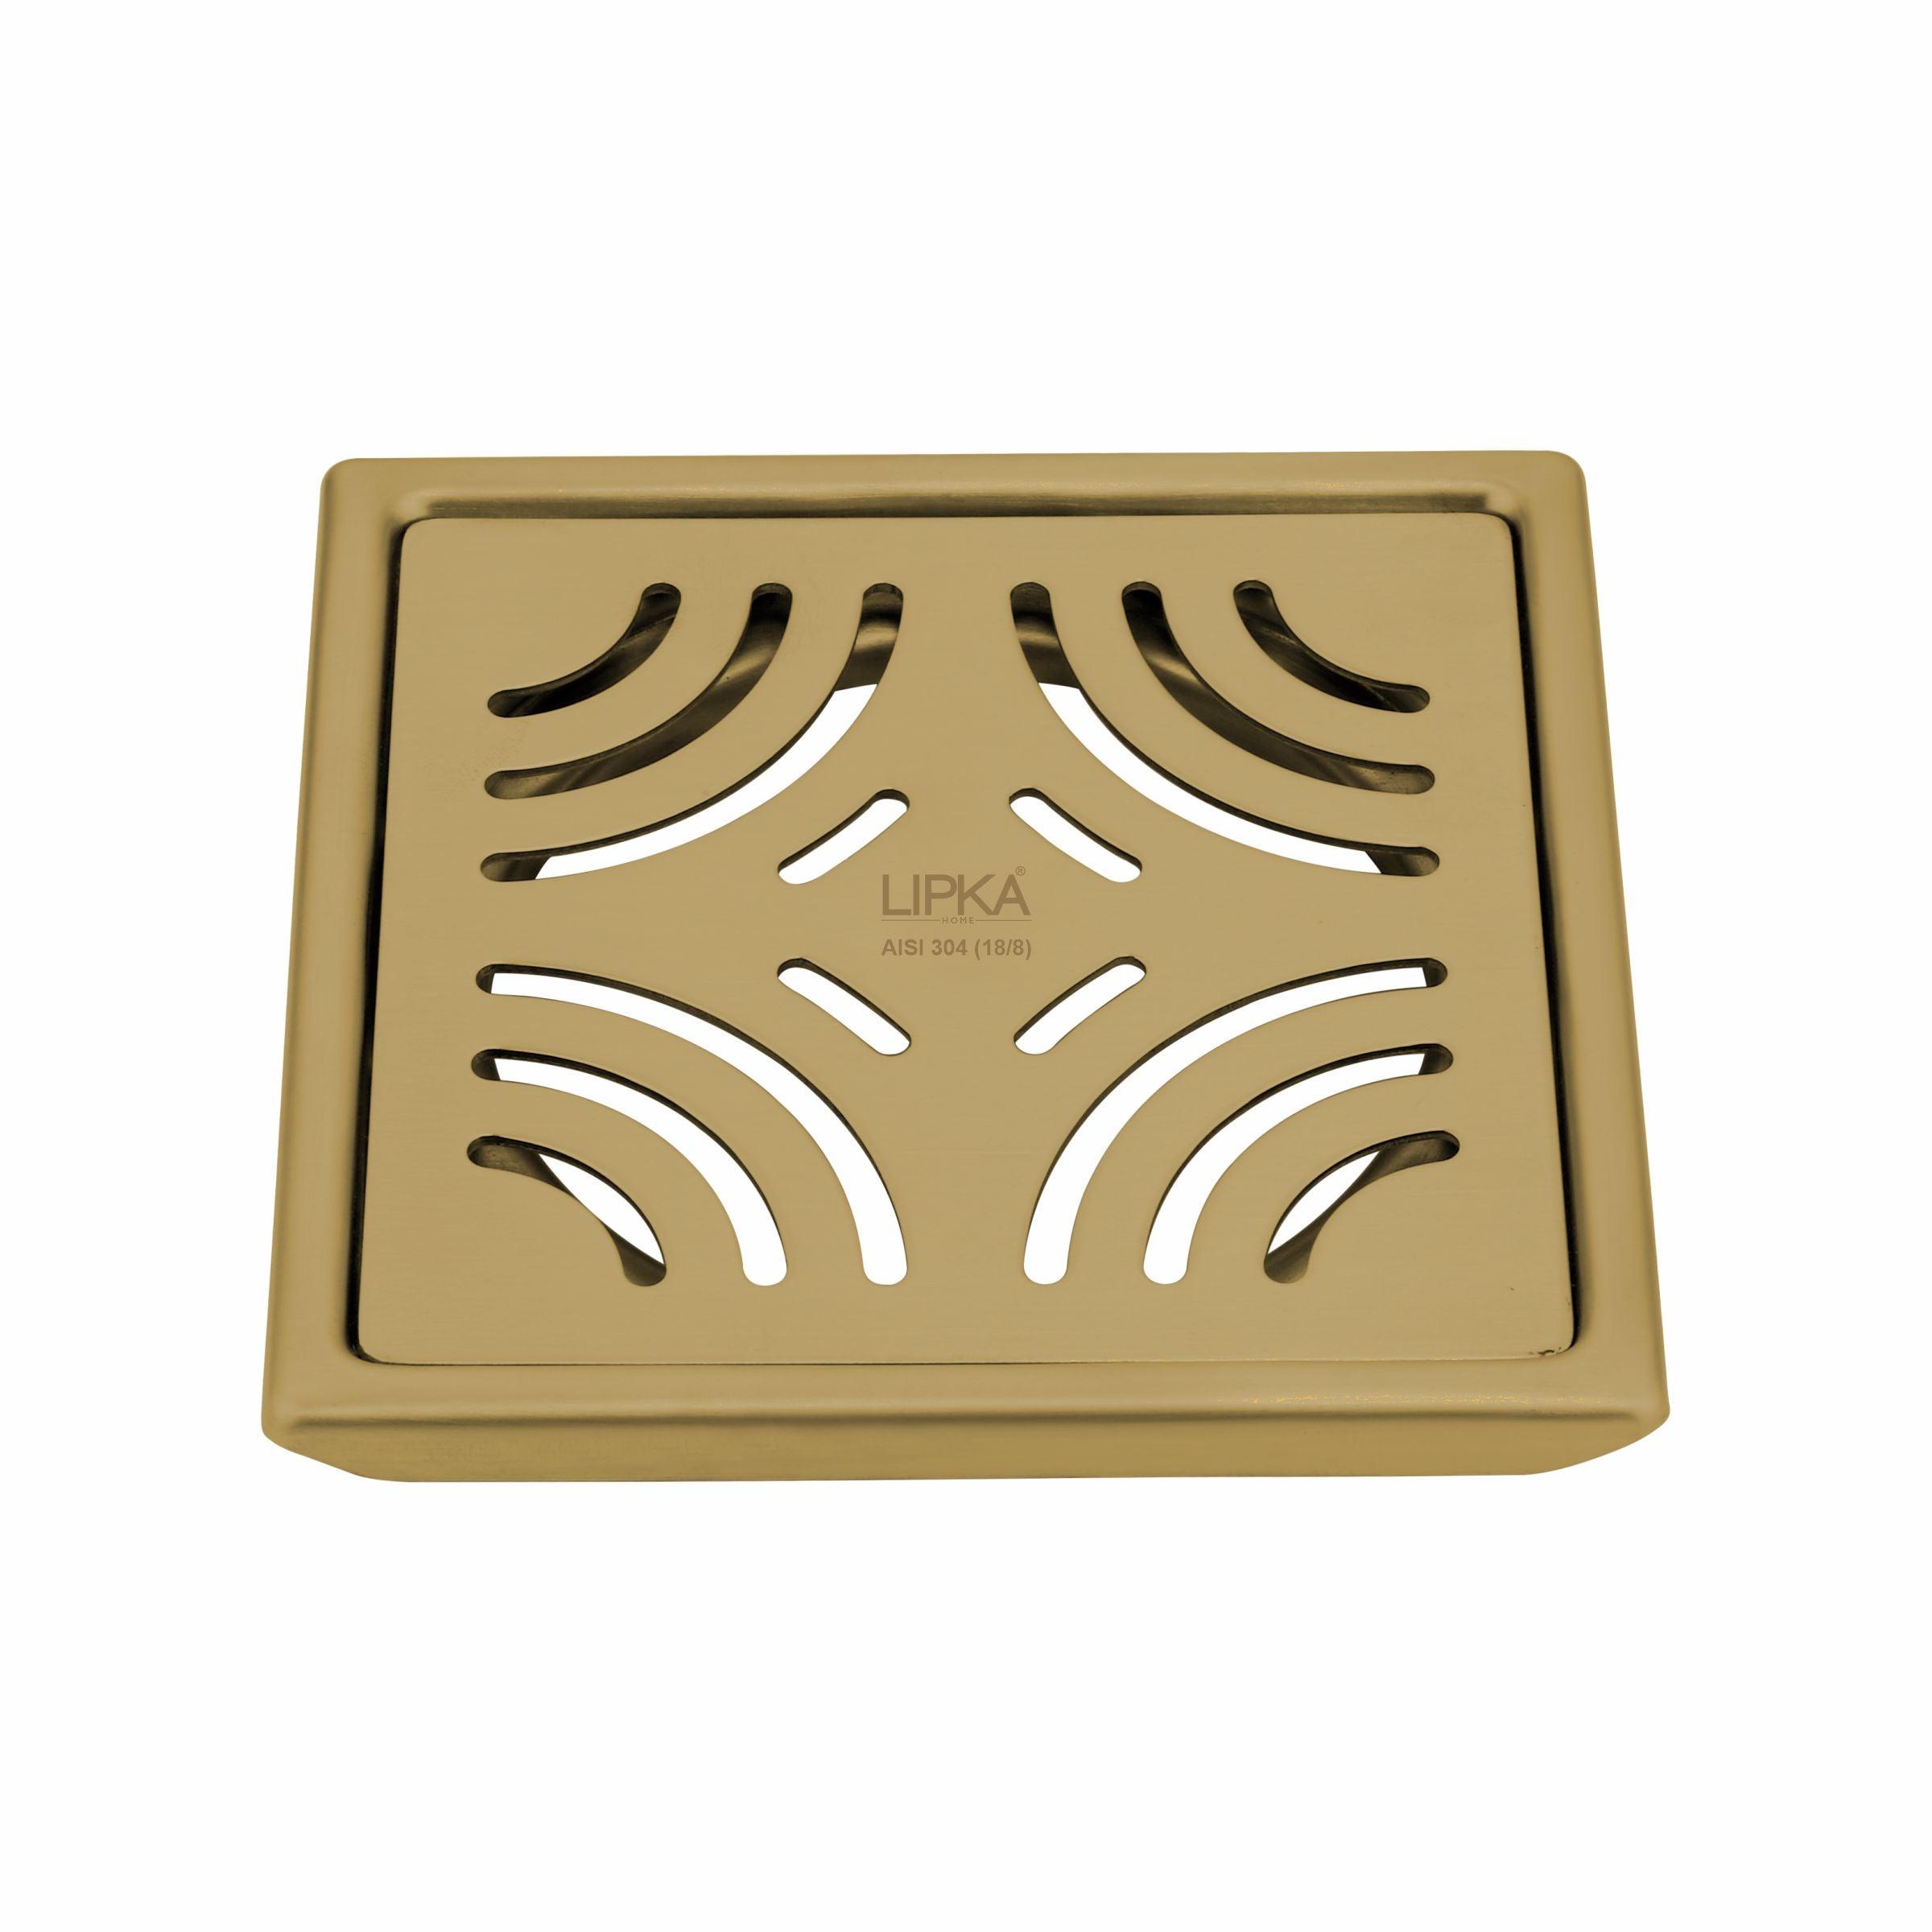 Purple Exclusive Square Floor Drain in Yellow Gold PVD Coating (5 x 5 Inches) - LIPKA